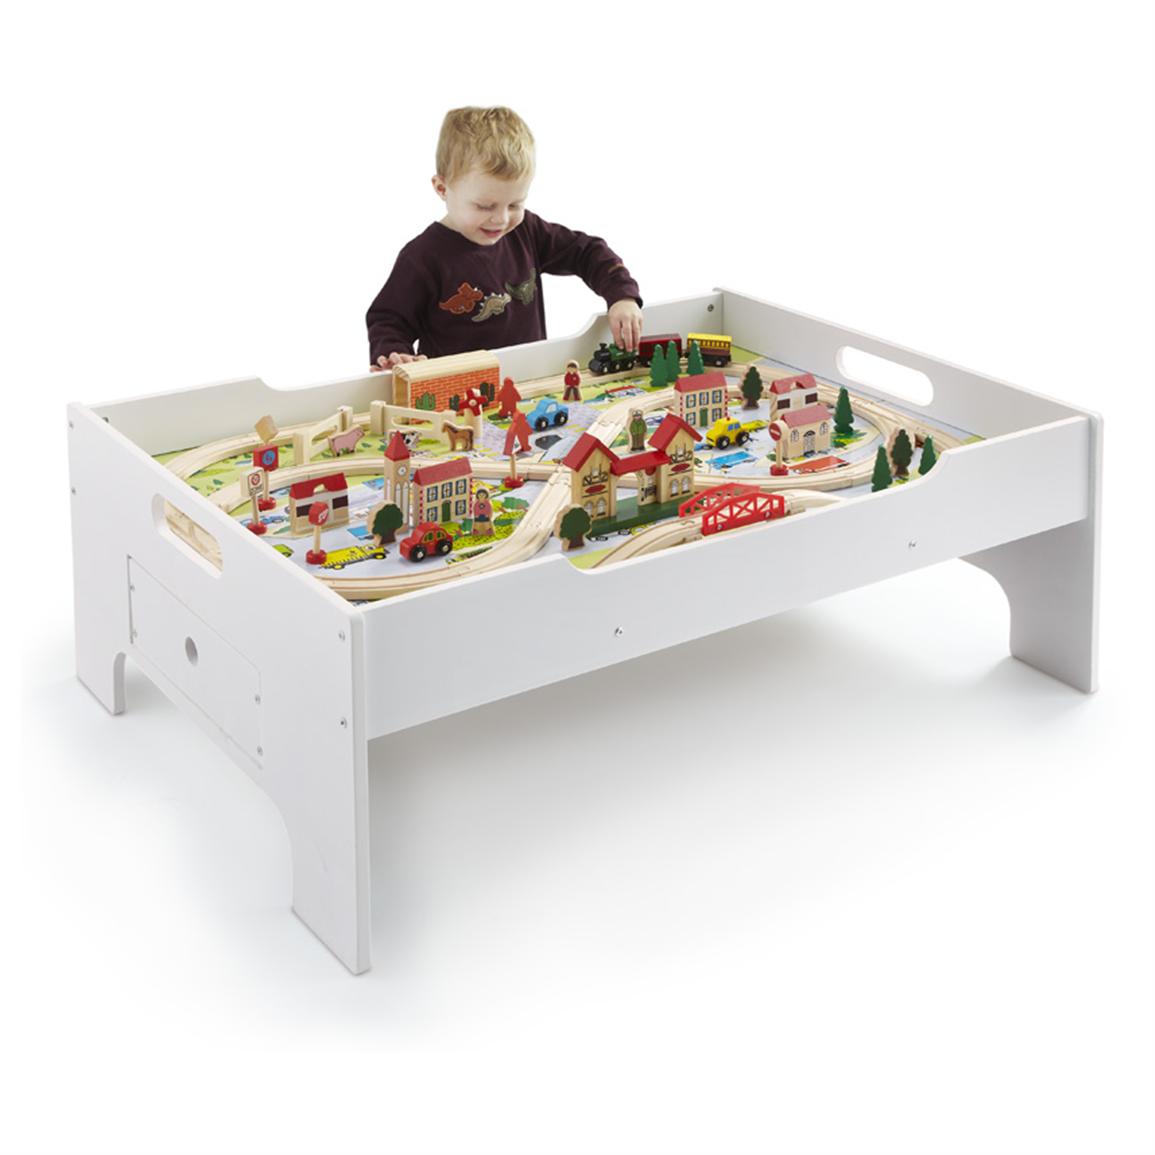 80 Pc Deluxe Train Set And Table 281679 Toys At Sportsman S